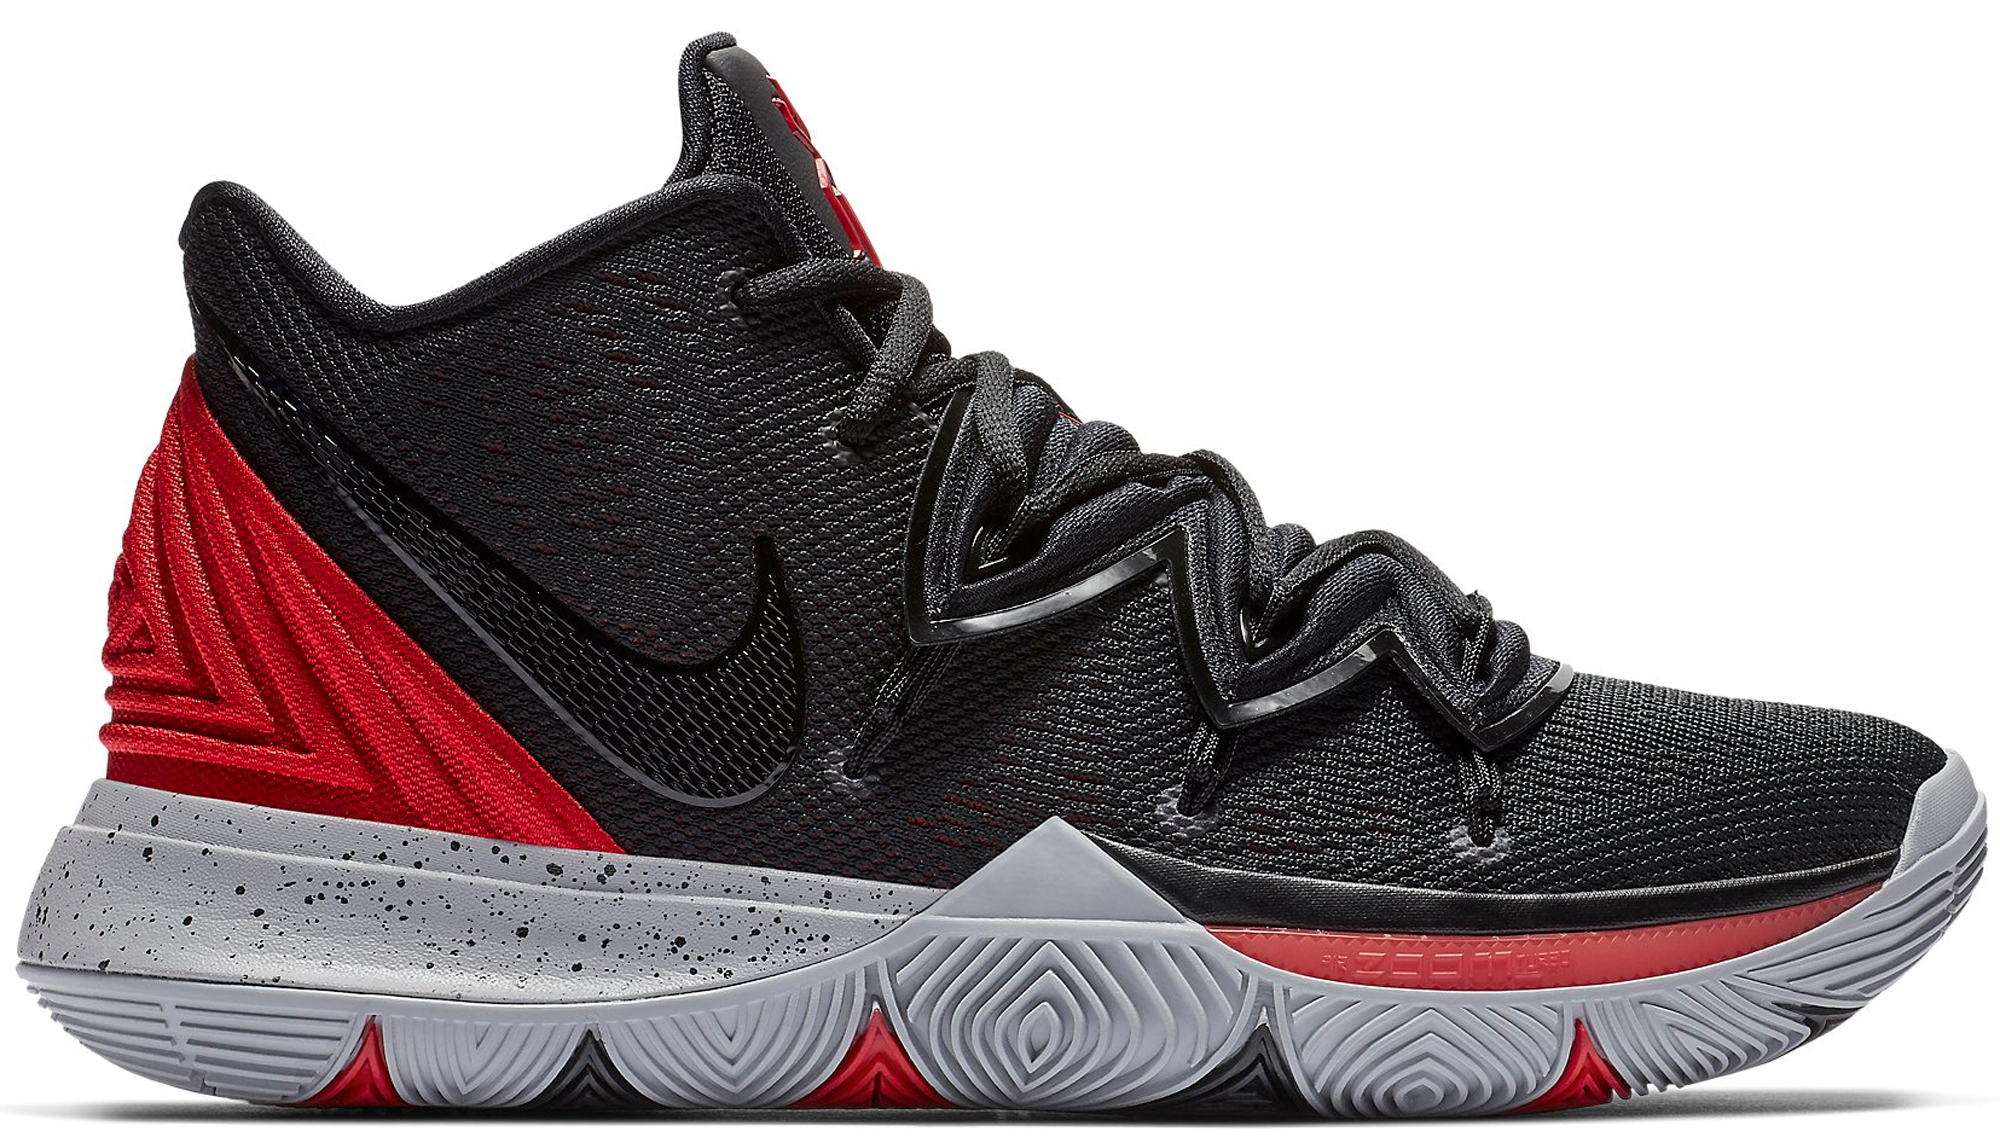 kyrie 5 bred release date